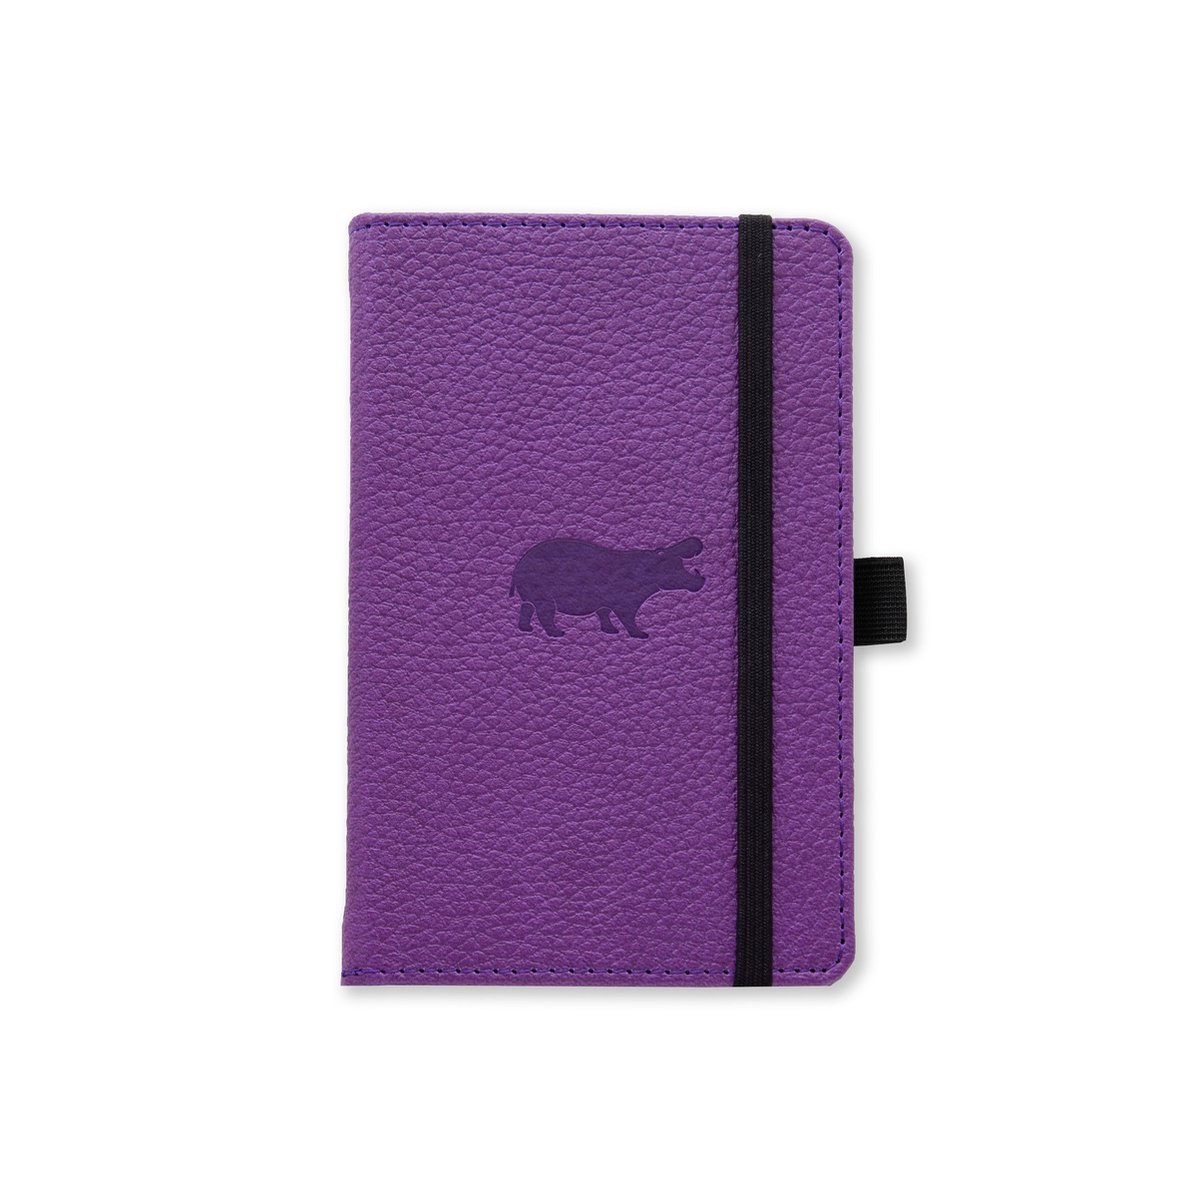 Dingbats A6+ Wildlife Purple Hippo Notebook - Dotted